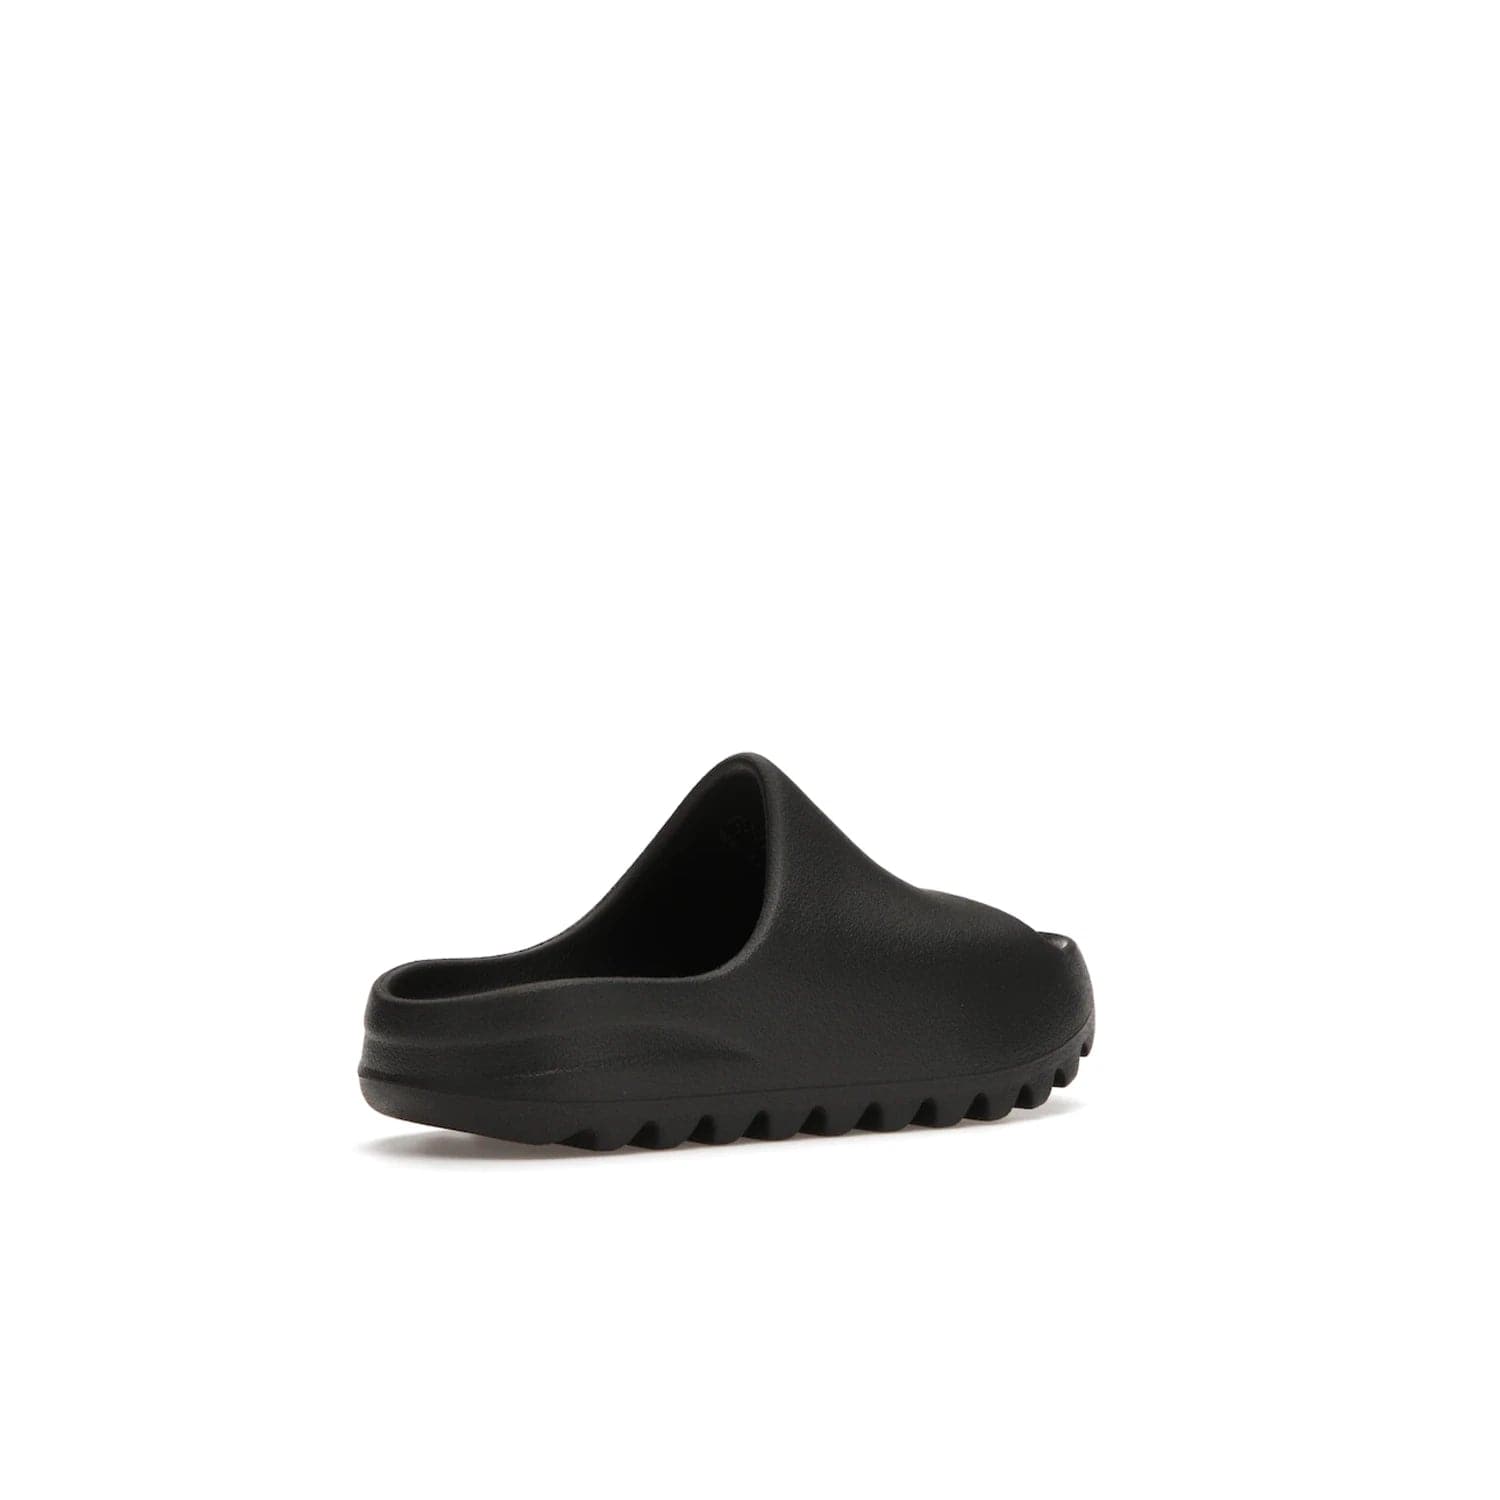 adidas Yeezy Slide Onyx (Kids) - Image 33 - Only at www.BallersClubKickz.com - adidas Yeezy Slide Onyx (Kids): Comfortable foam construction with textured surface and iconic three-stripe logo. Breathable, open-toe design and deep grooves for traction. Released in March 2021 at $50.